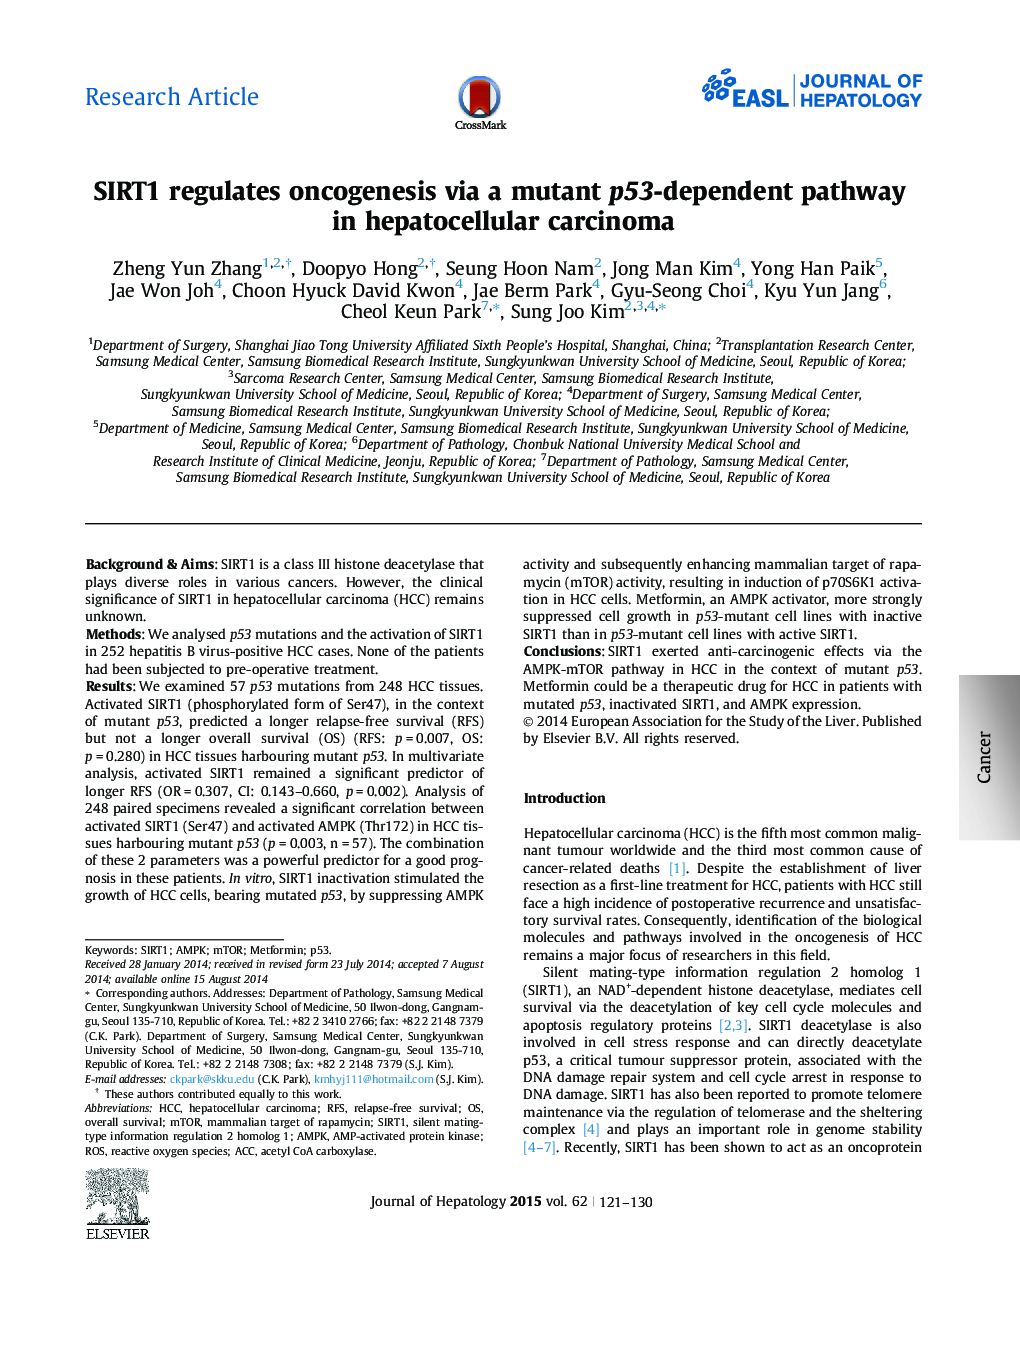 Research ArticleSIRT1 regulates oncogenesis via a mutant p53-dependent pathway in hepatocellular carcinoma